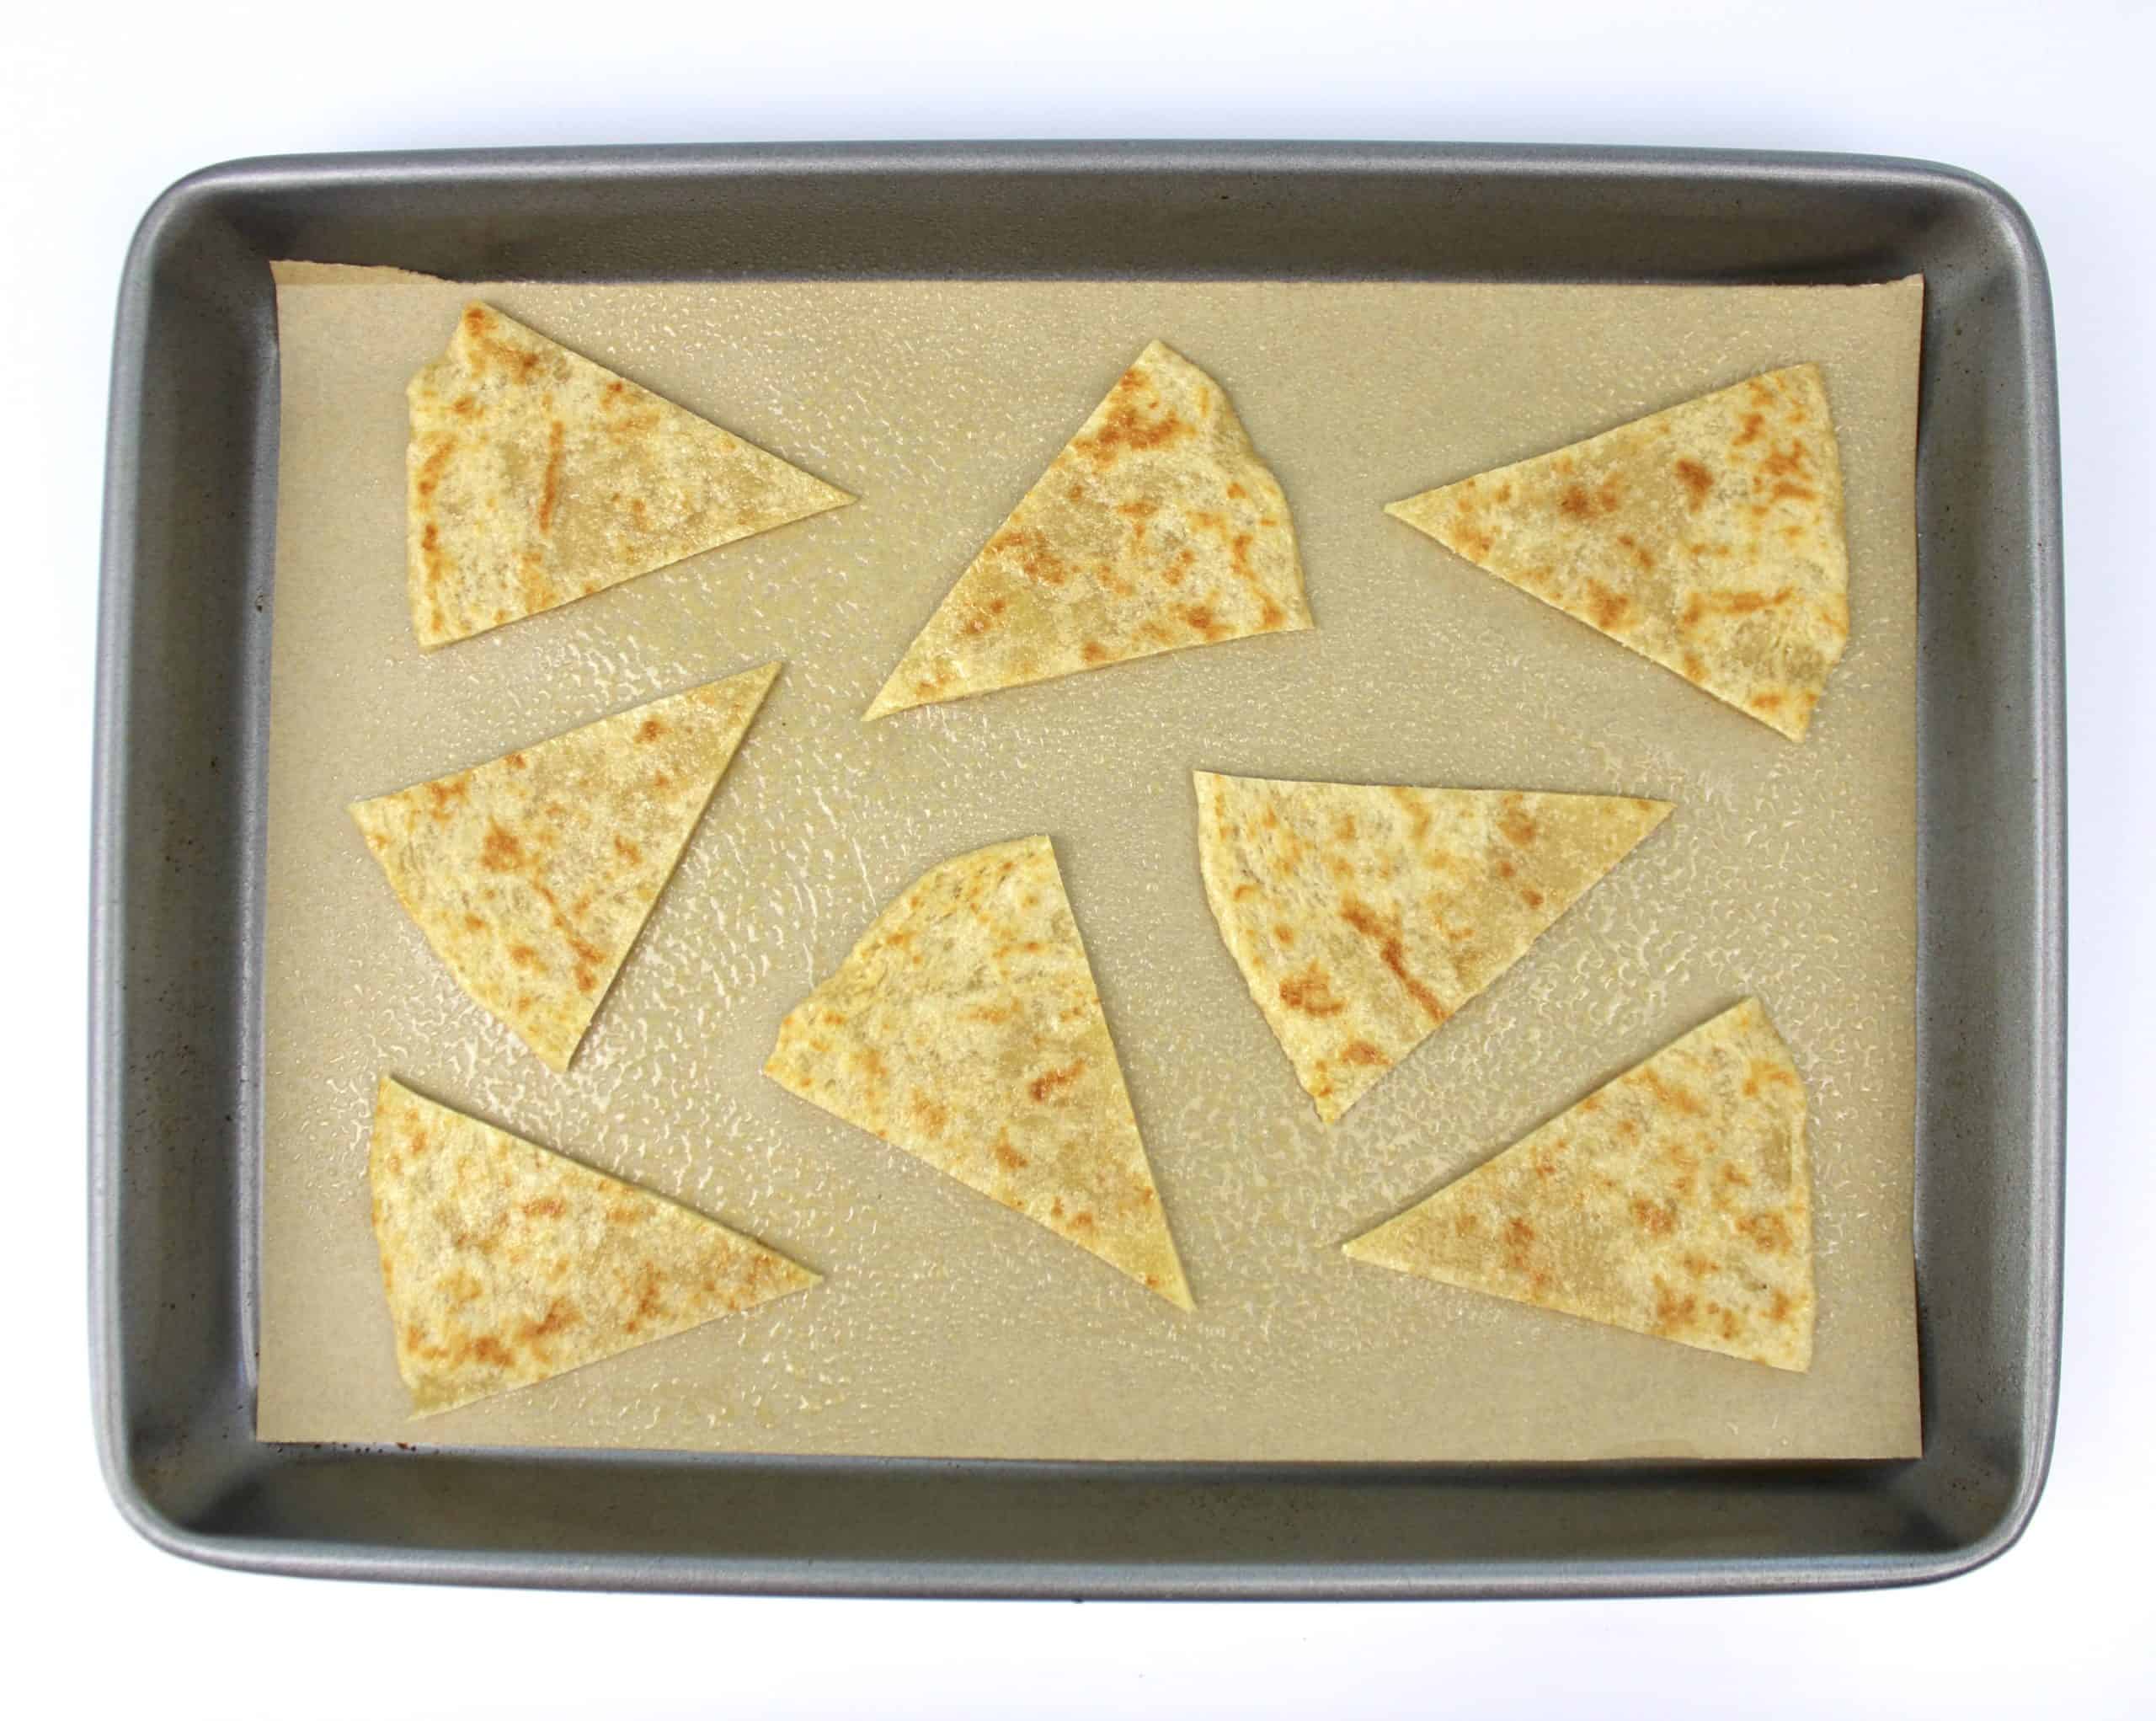 8 tortilla chips on baking sheet with parchment unbaked